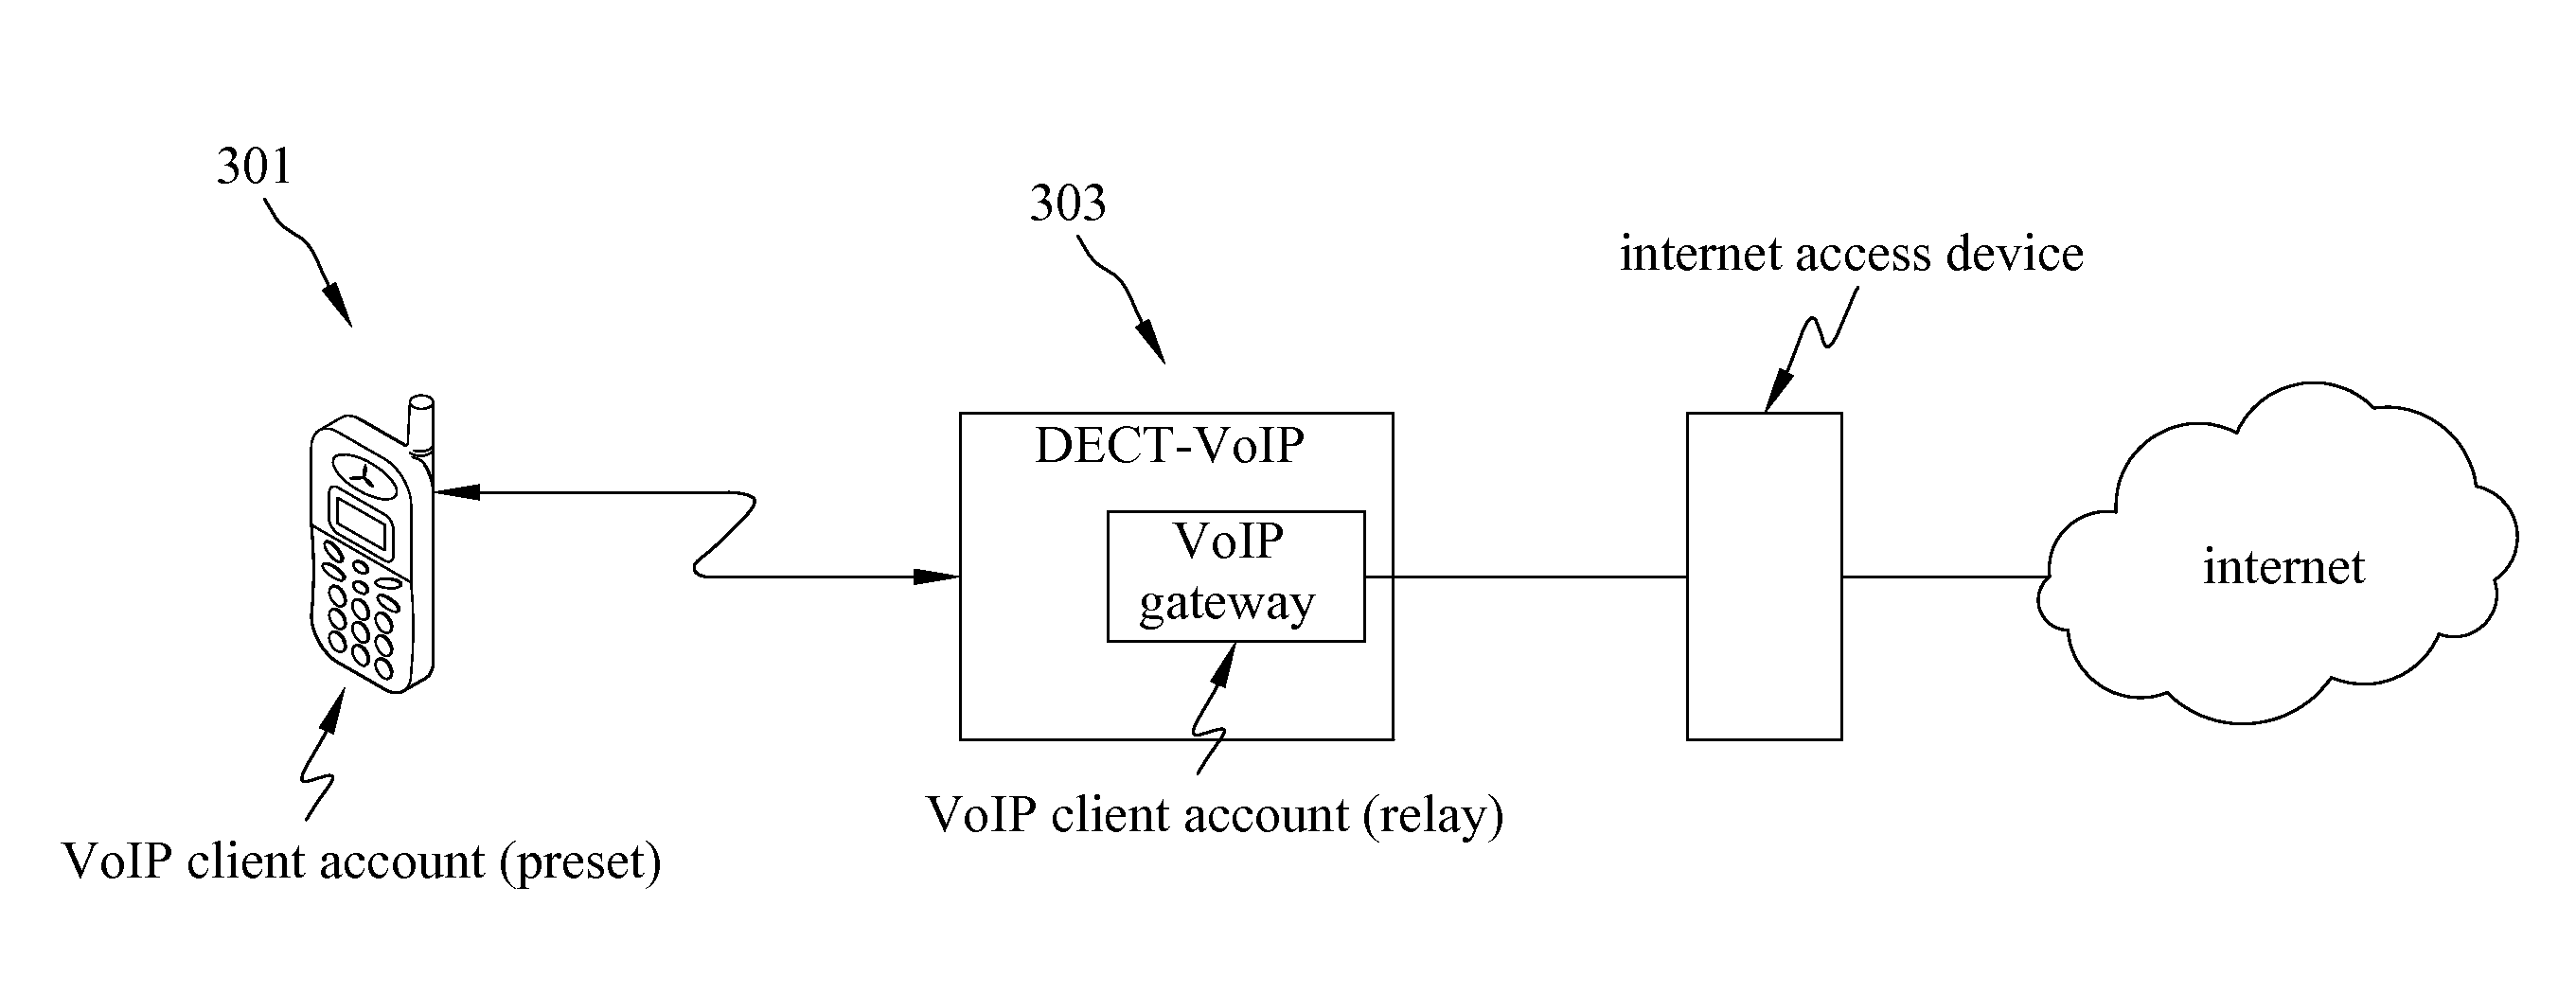 System, apparatus and method for roaming in dect-voip network